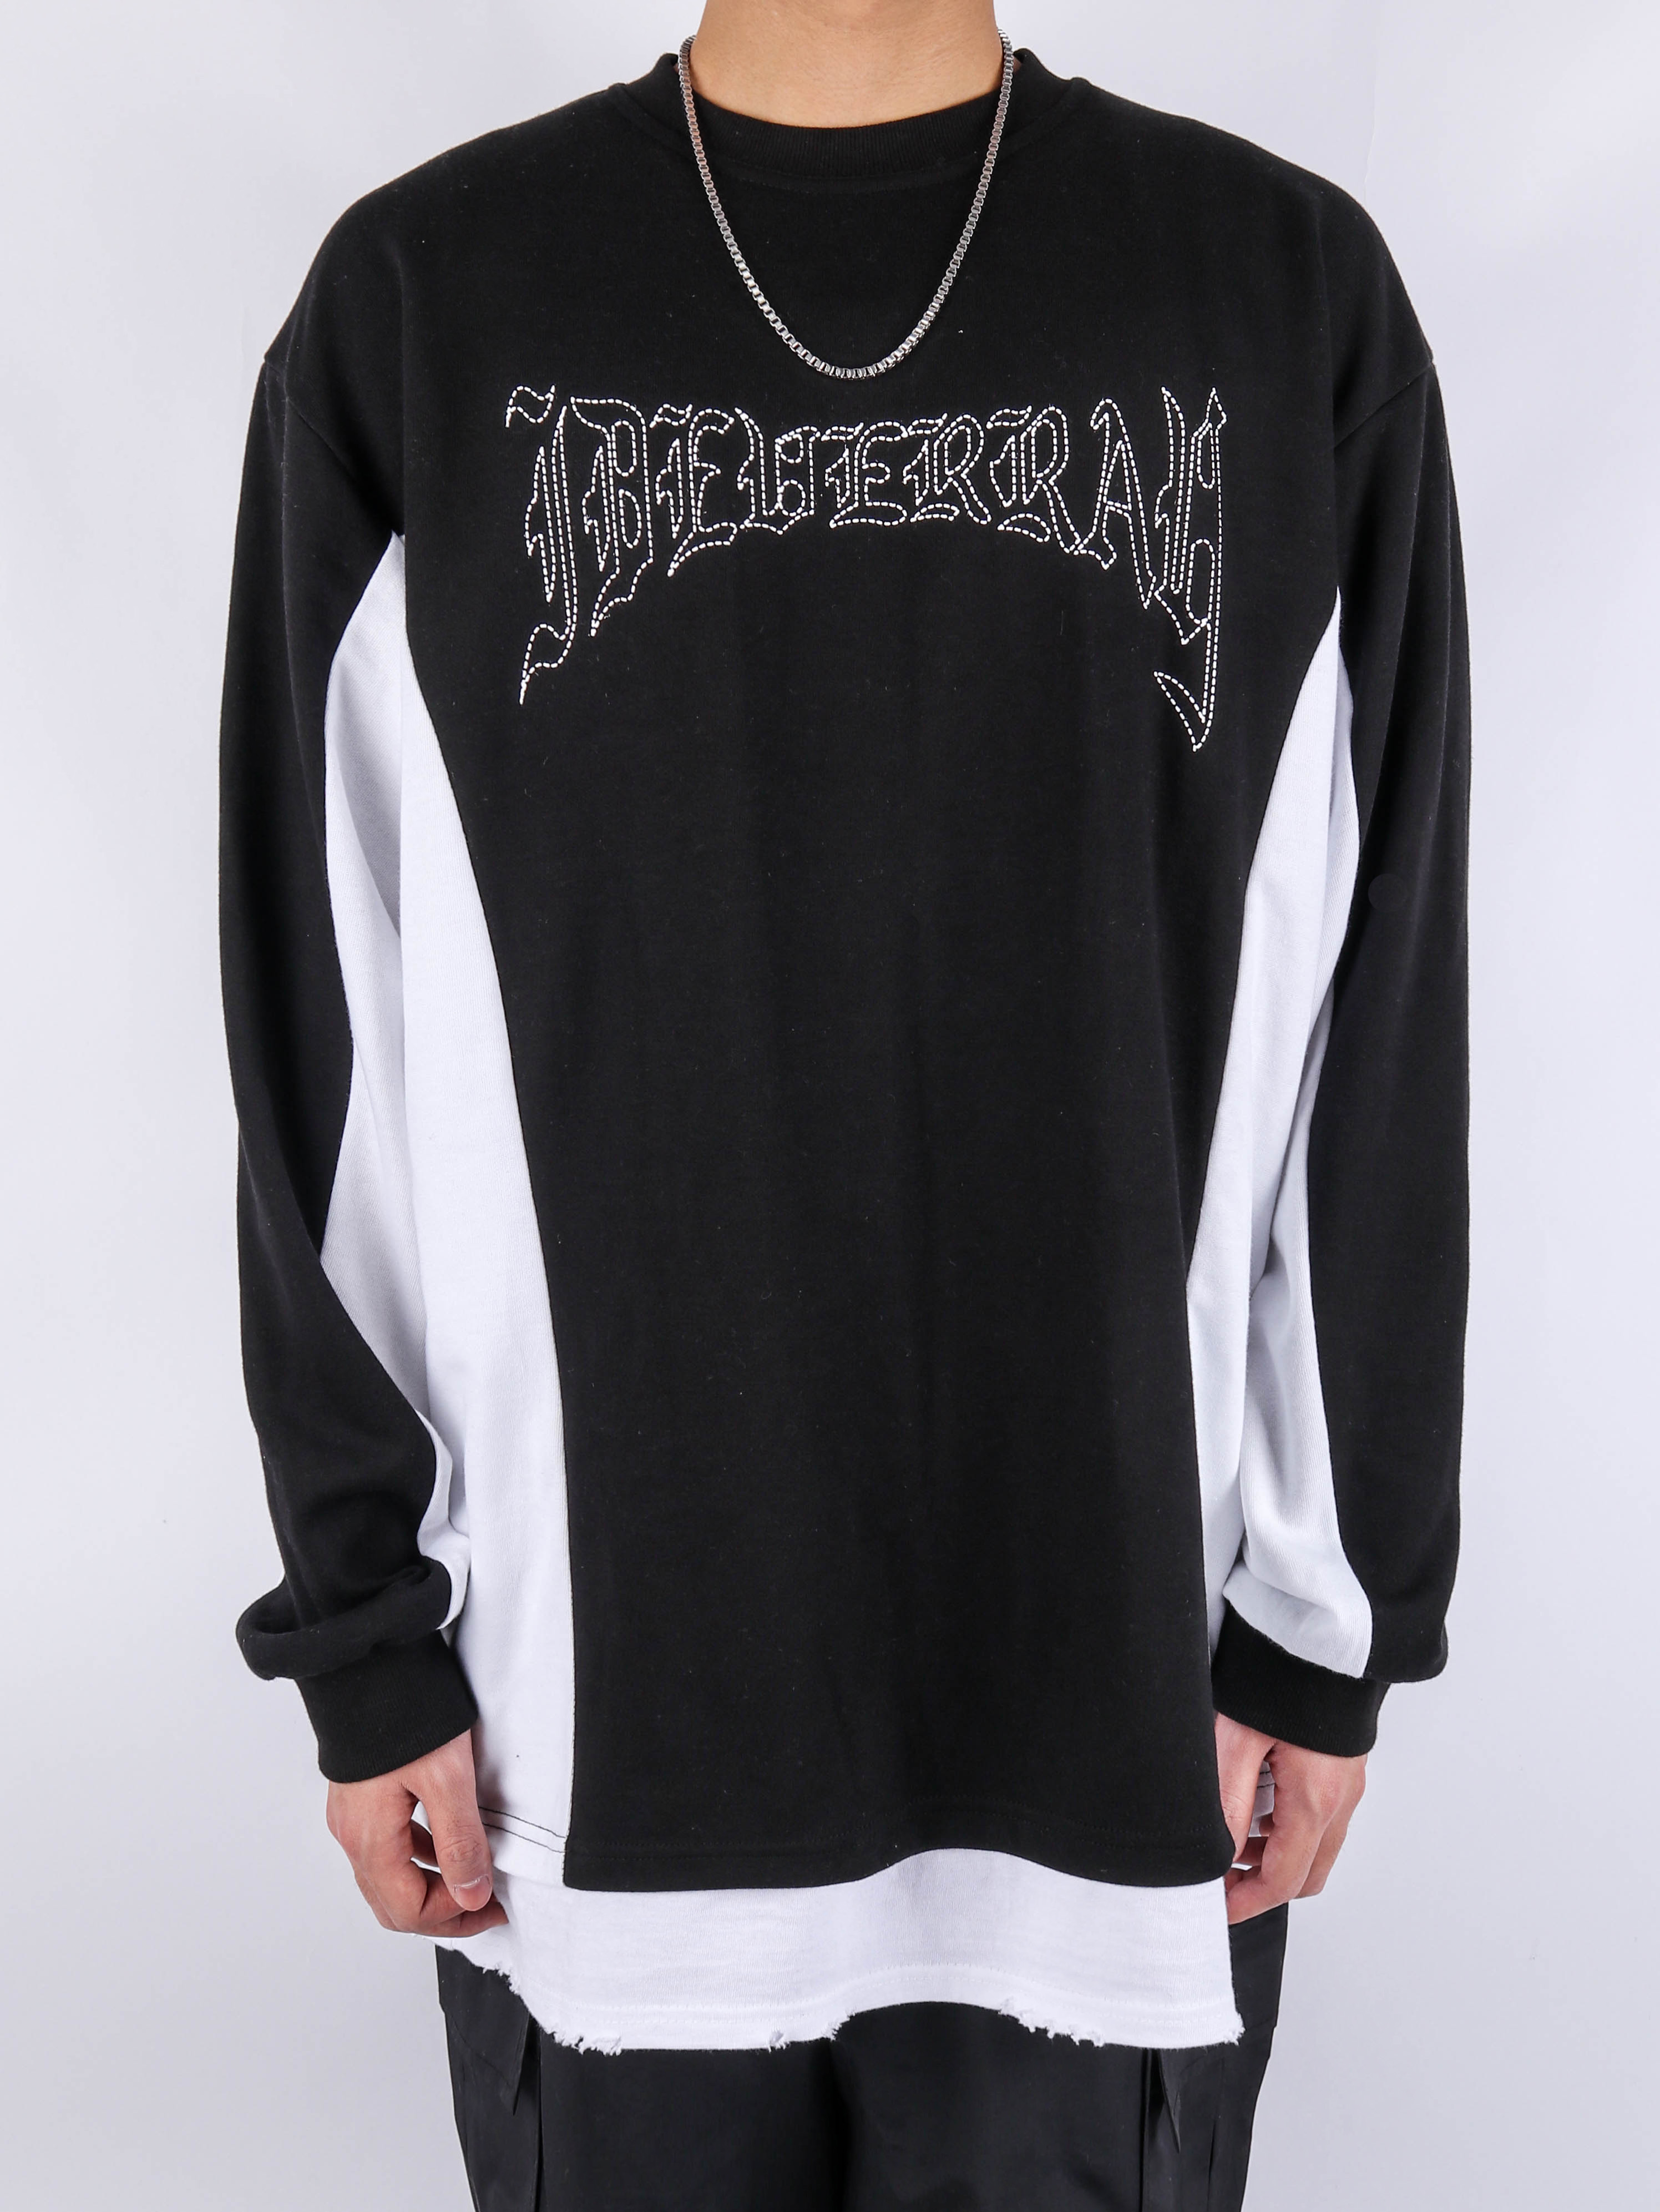 justyoung-DH Lettering Stitch Long Sleeve Tee (2color)♡韓國男裝上衣